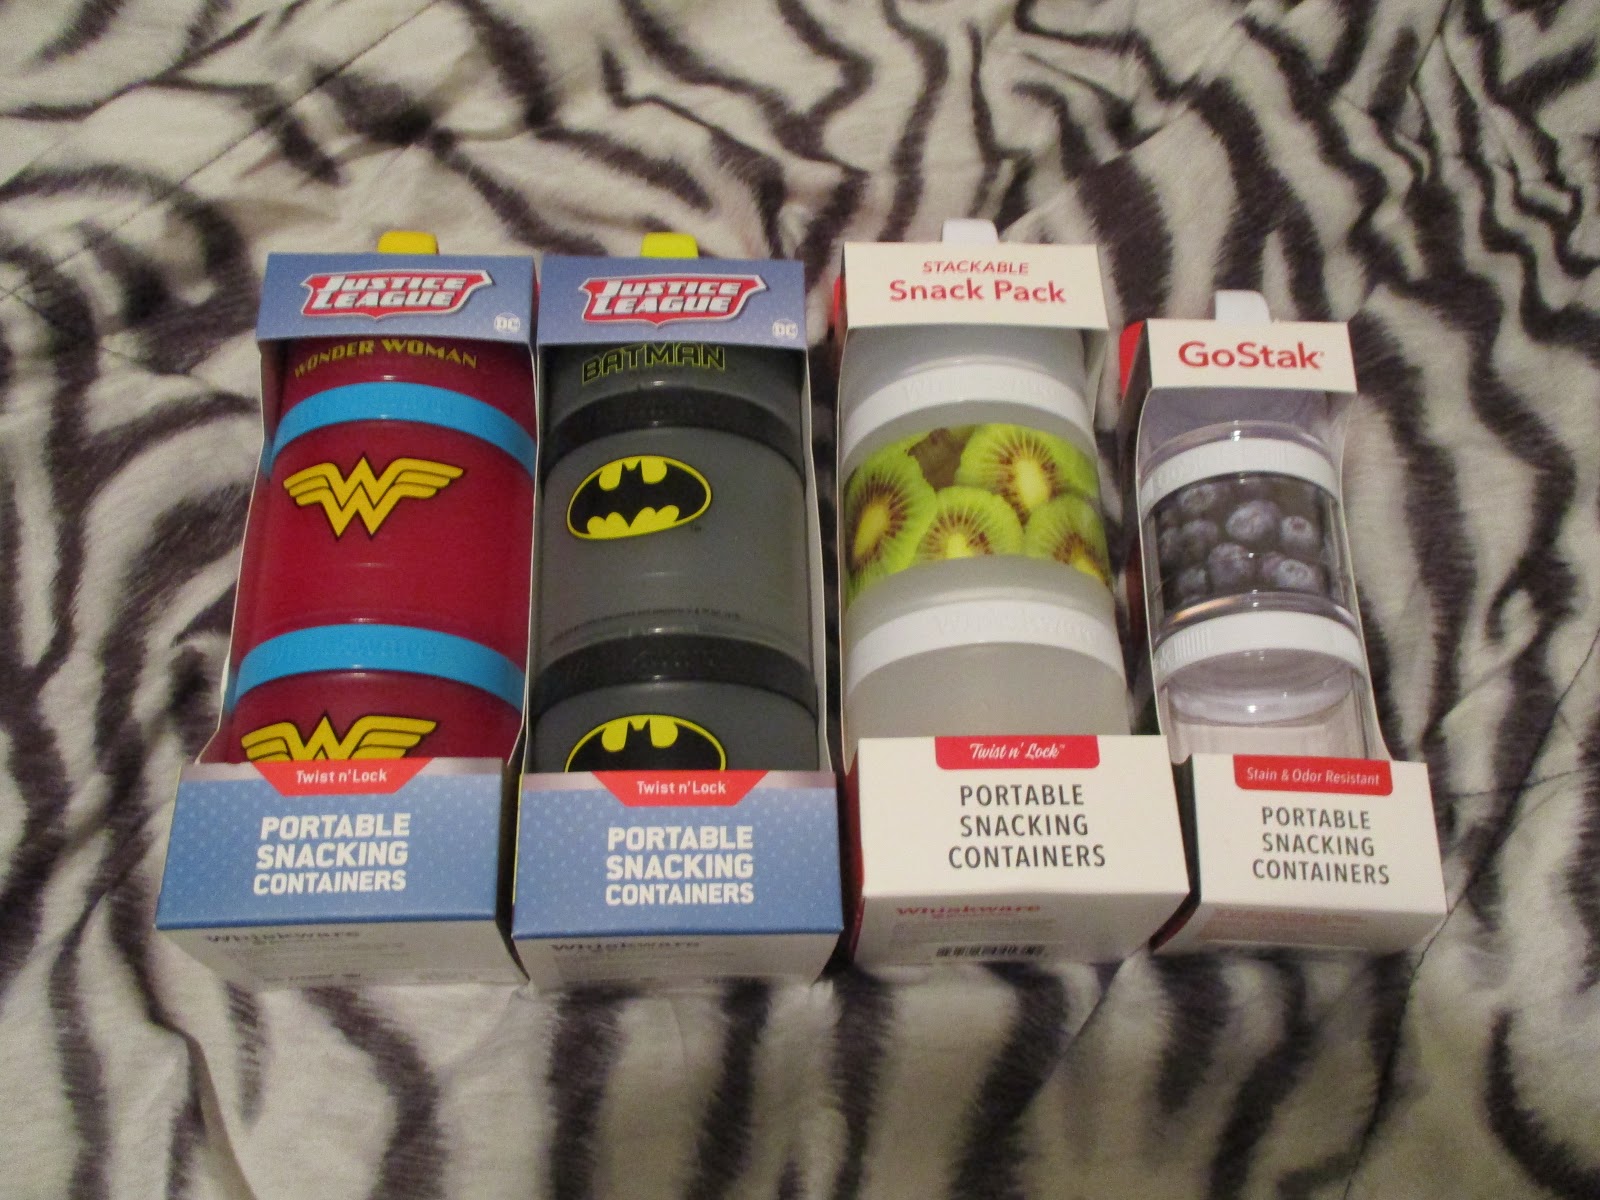 Missy's Product Reviews : Whiskware DC Snack Packs & Snack Containers